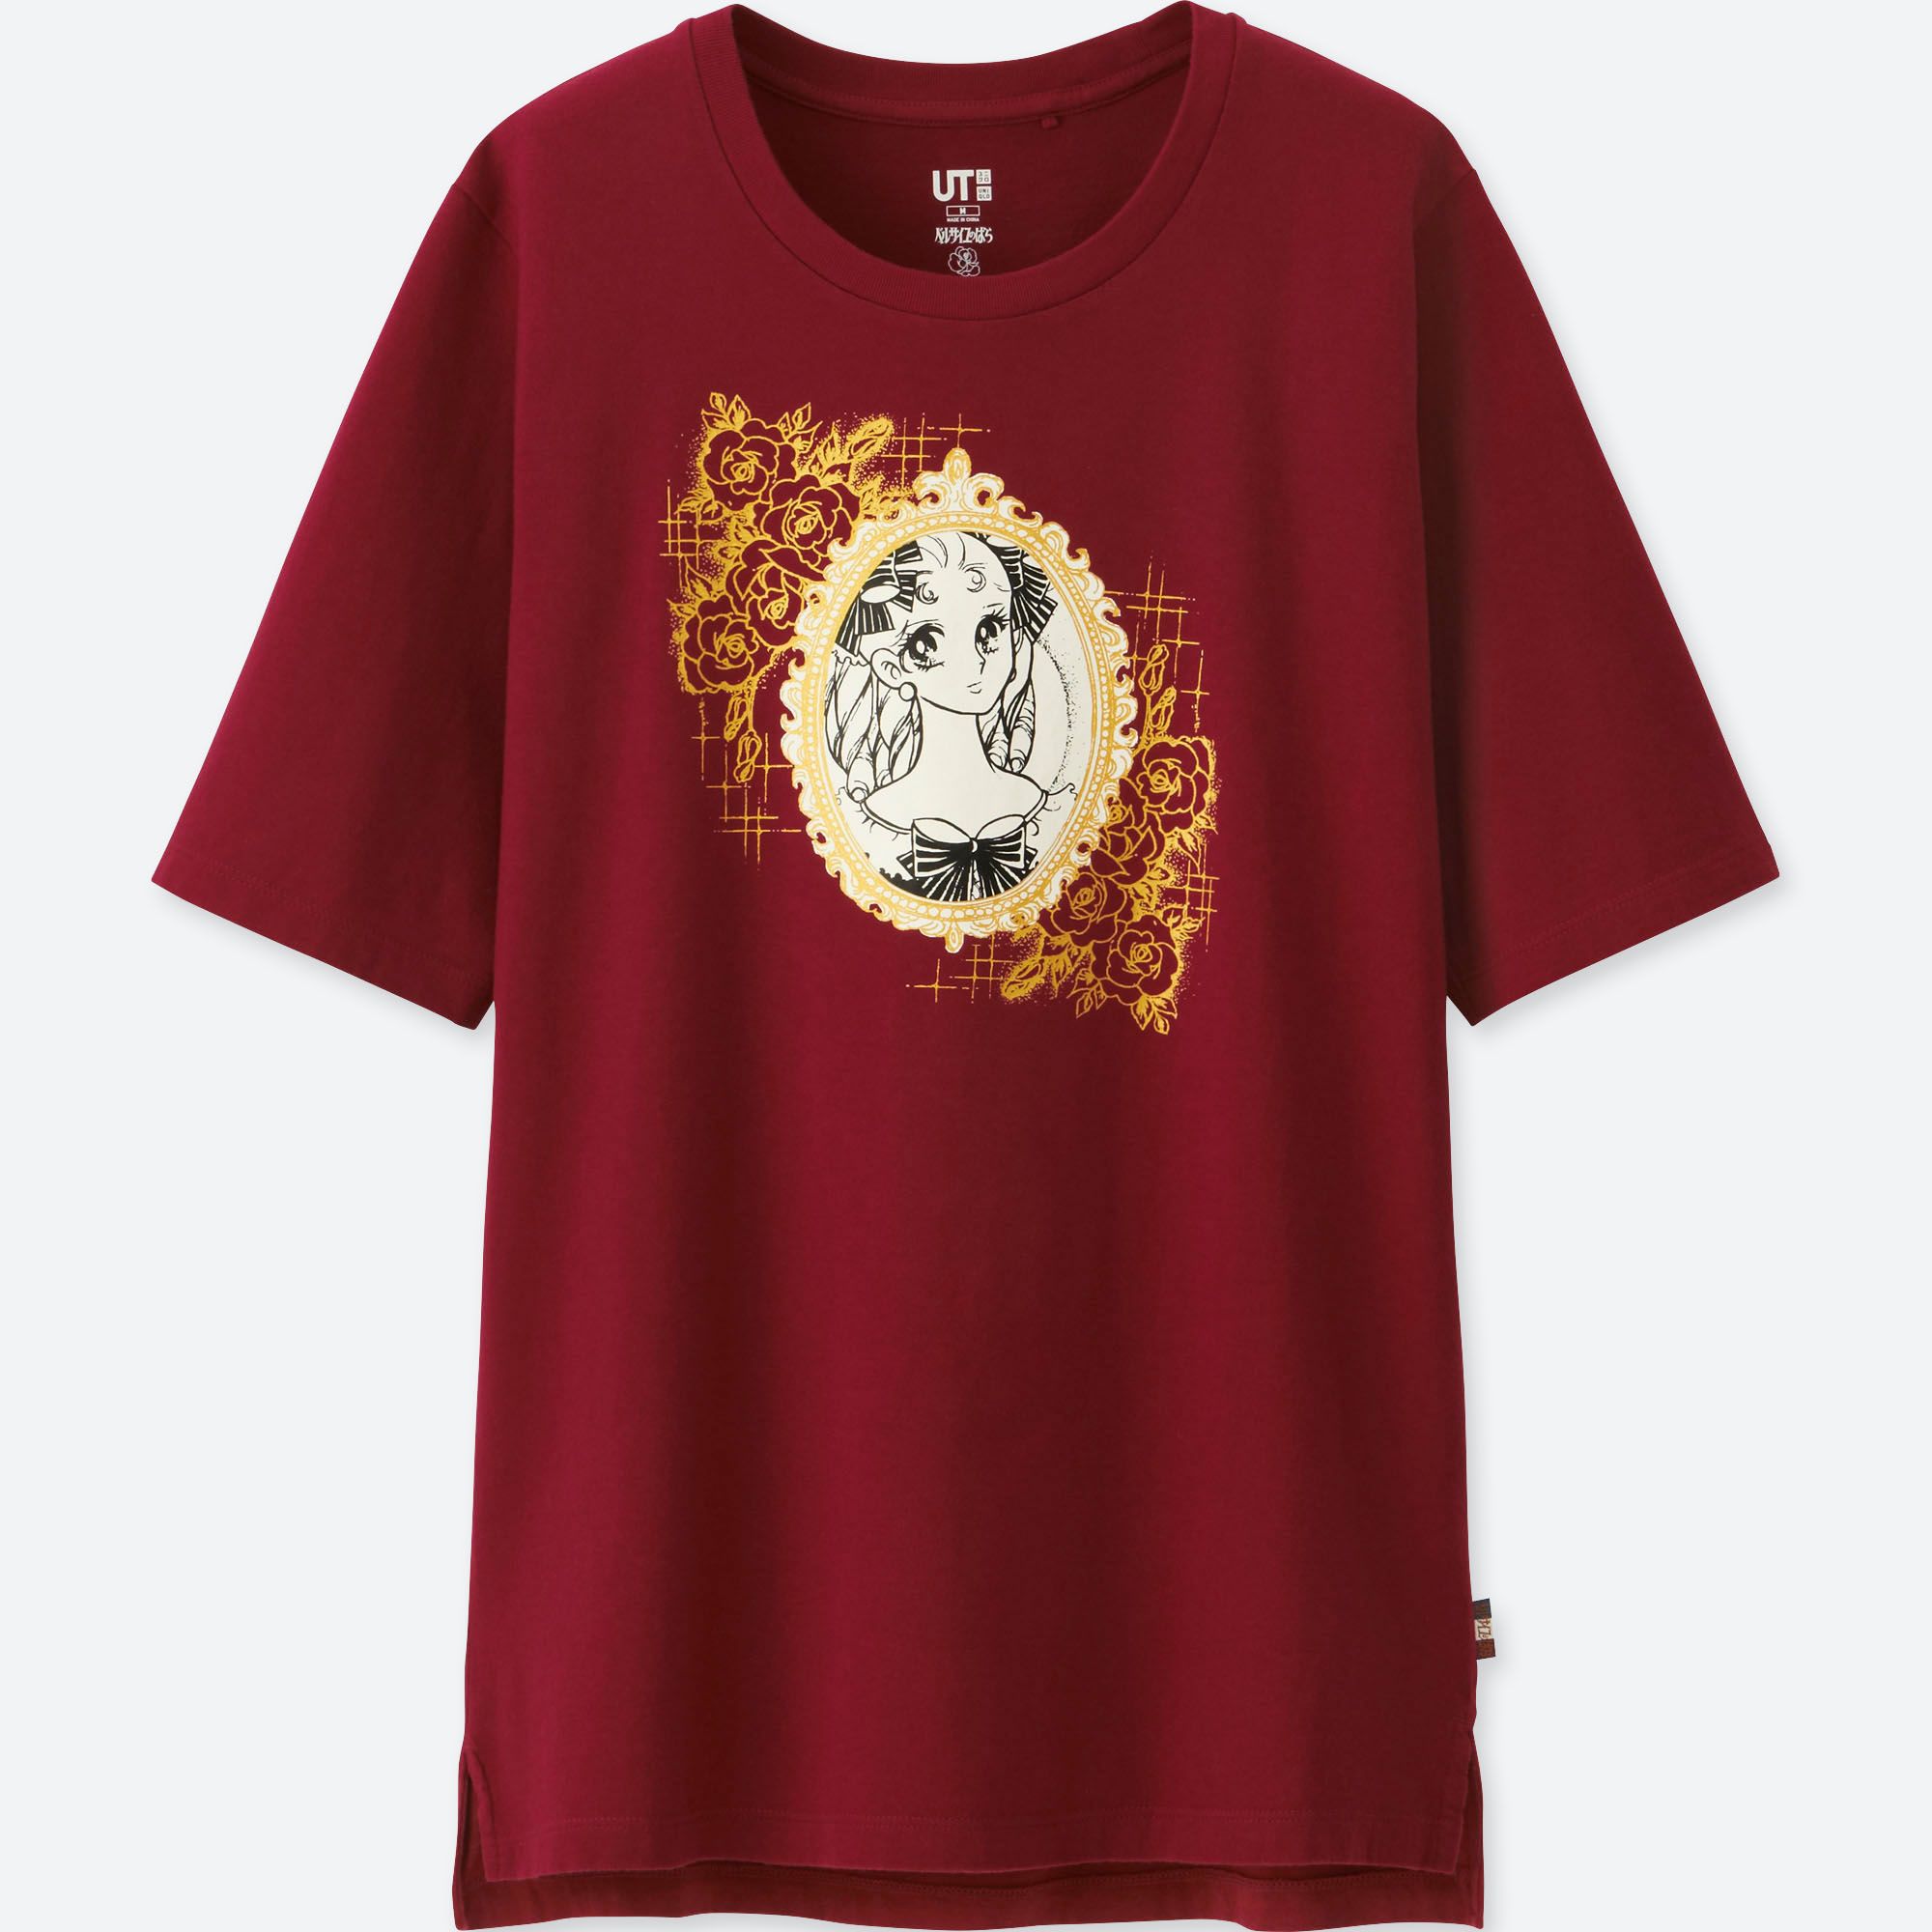 Uniqlo's New Rose of Versailles Line Will Make Any Manga Fan Swoon